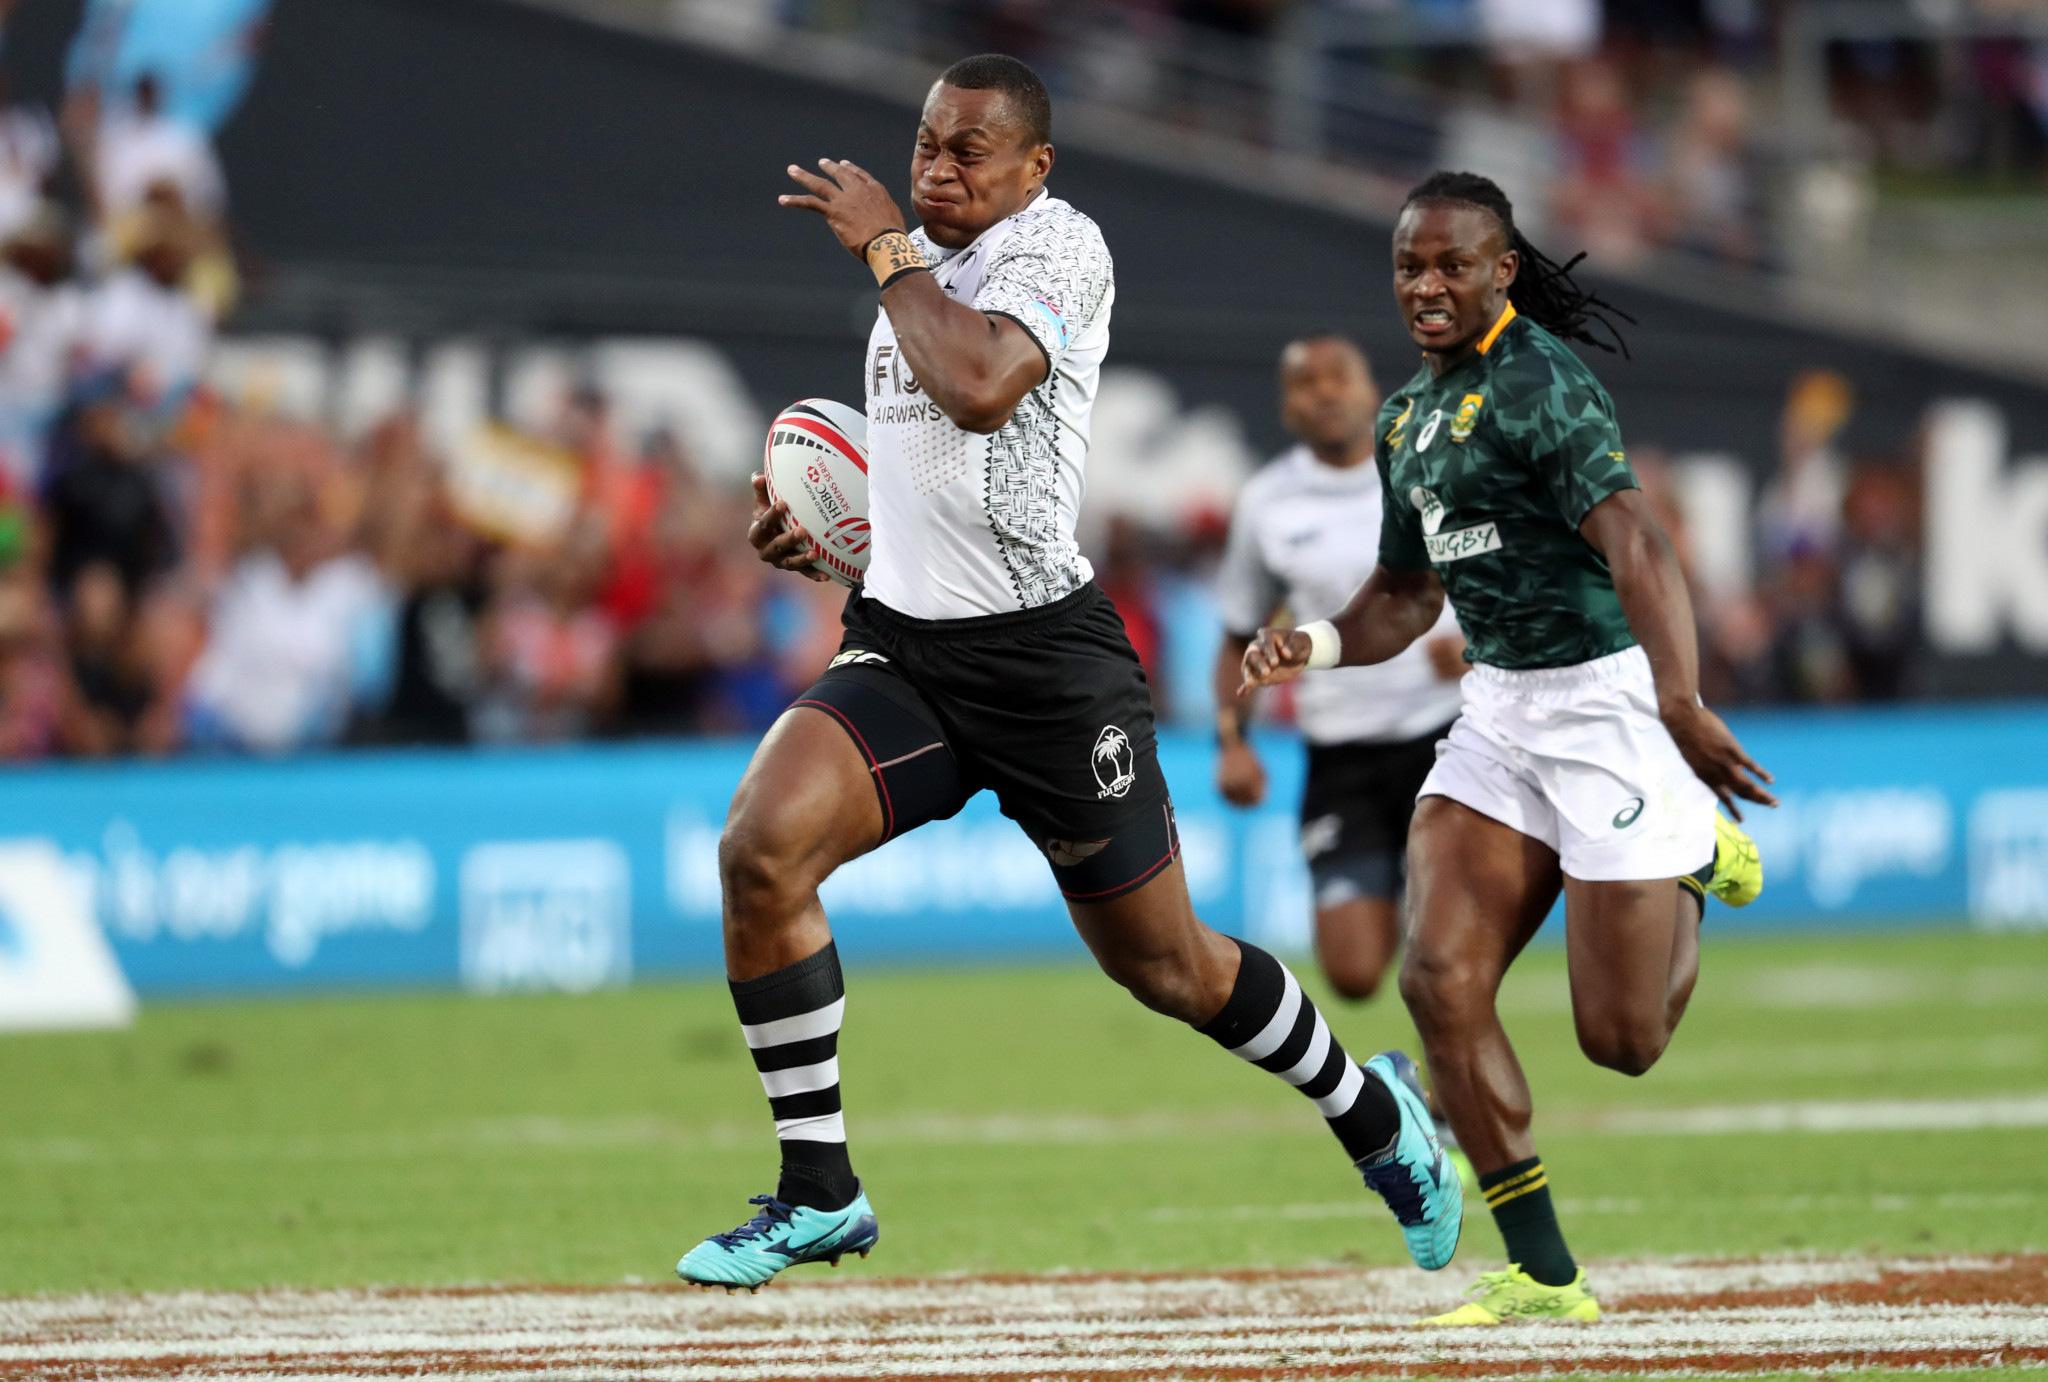 Fiji fightback to stun South Africa in final of World Rugby Sevens Series event in Hamilton 